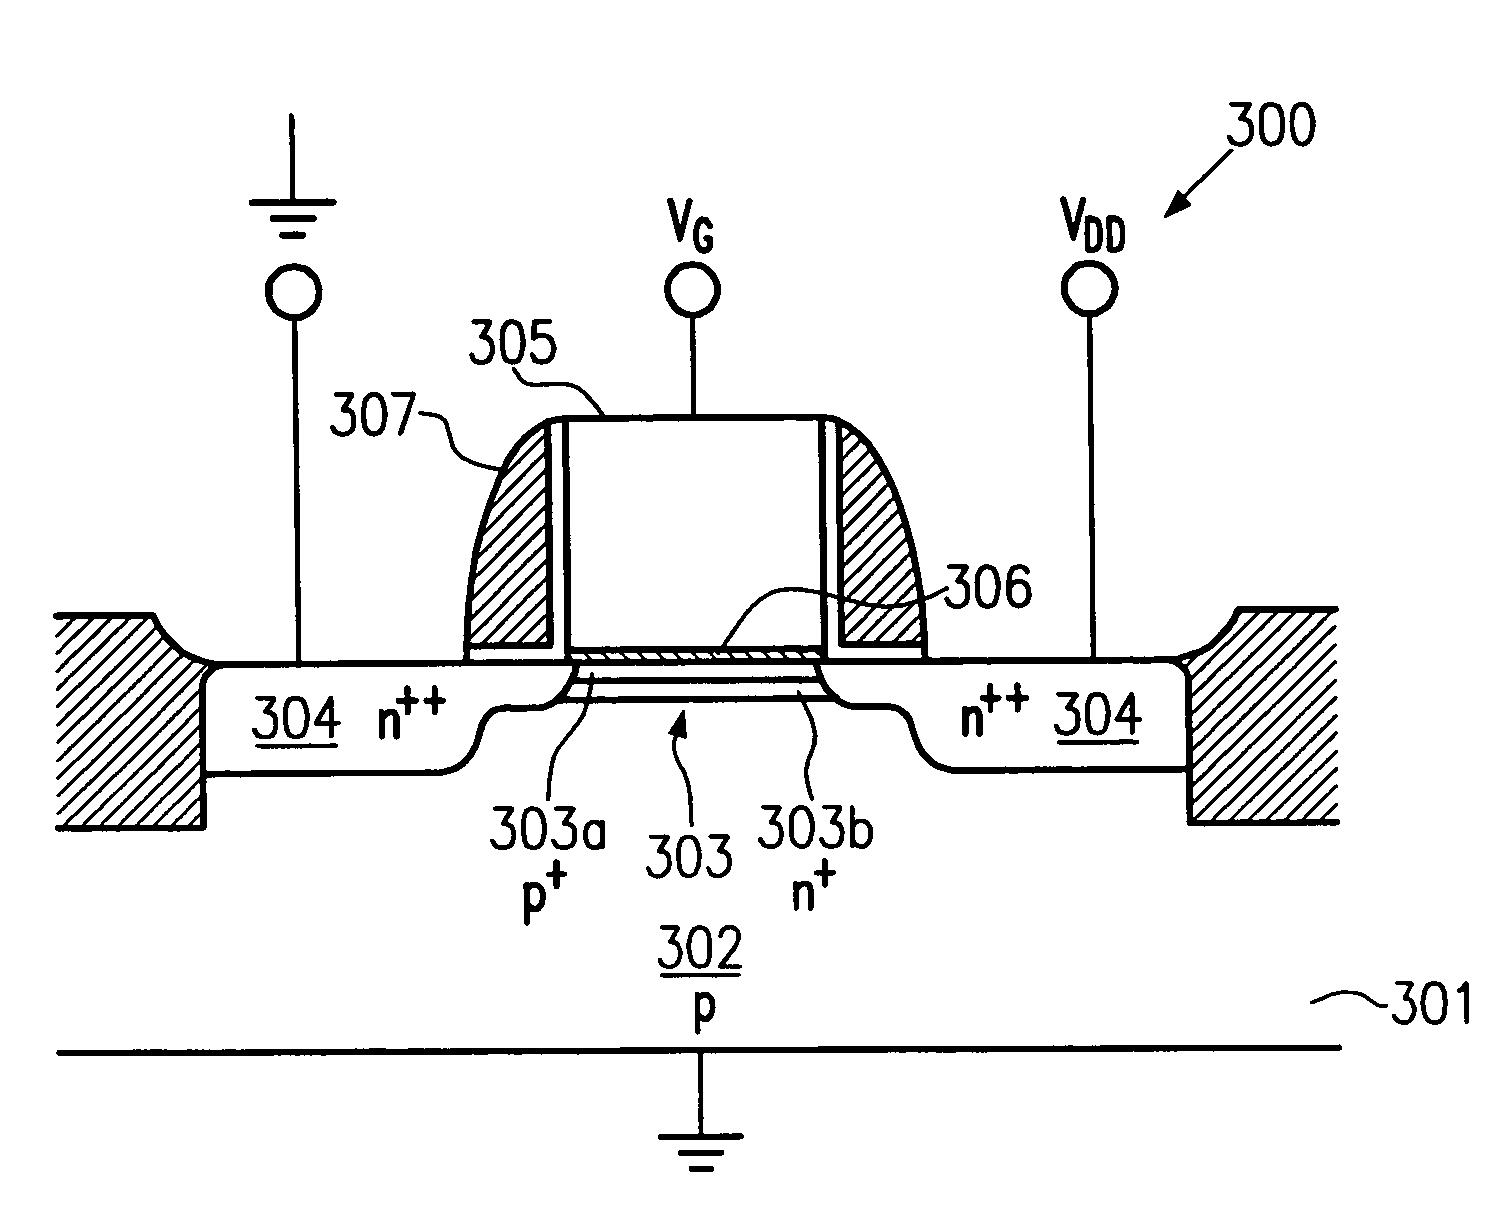 Self-biasing transistor structure and an SRAM cell having less than six transistors